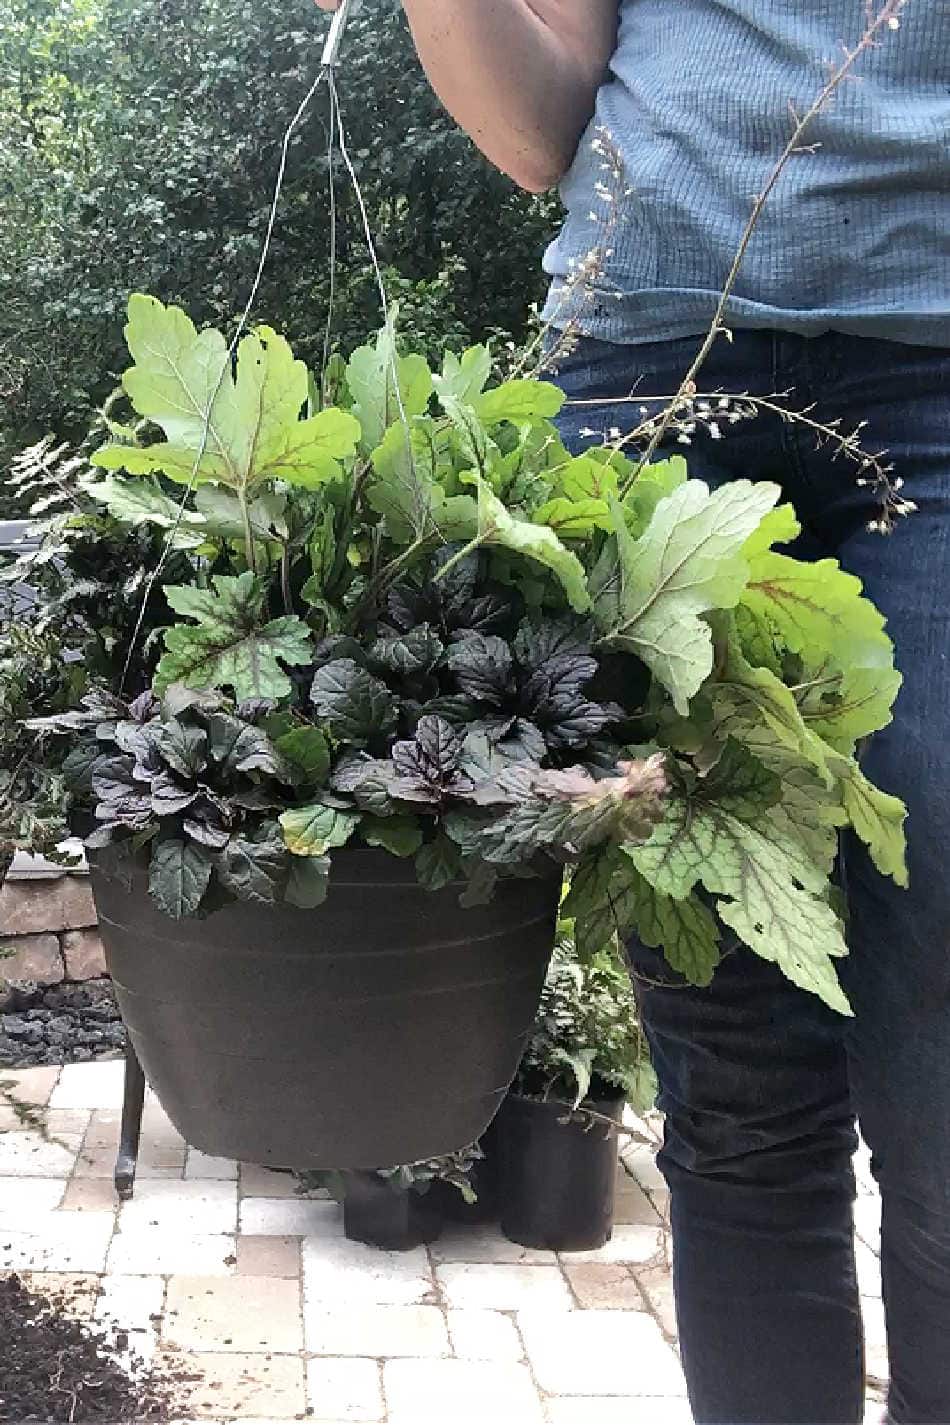 Making Autumn Containers and Hanging Baskets | Growing Up Herbal | I'm getting creative and refreshing some containers and hanging baskets with perennial plants for the autumn season (and hopefully longer!)